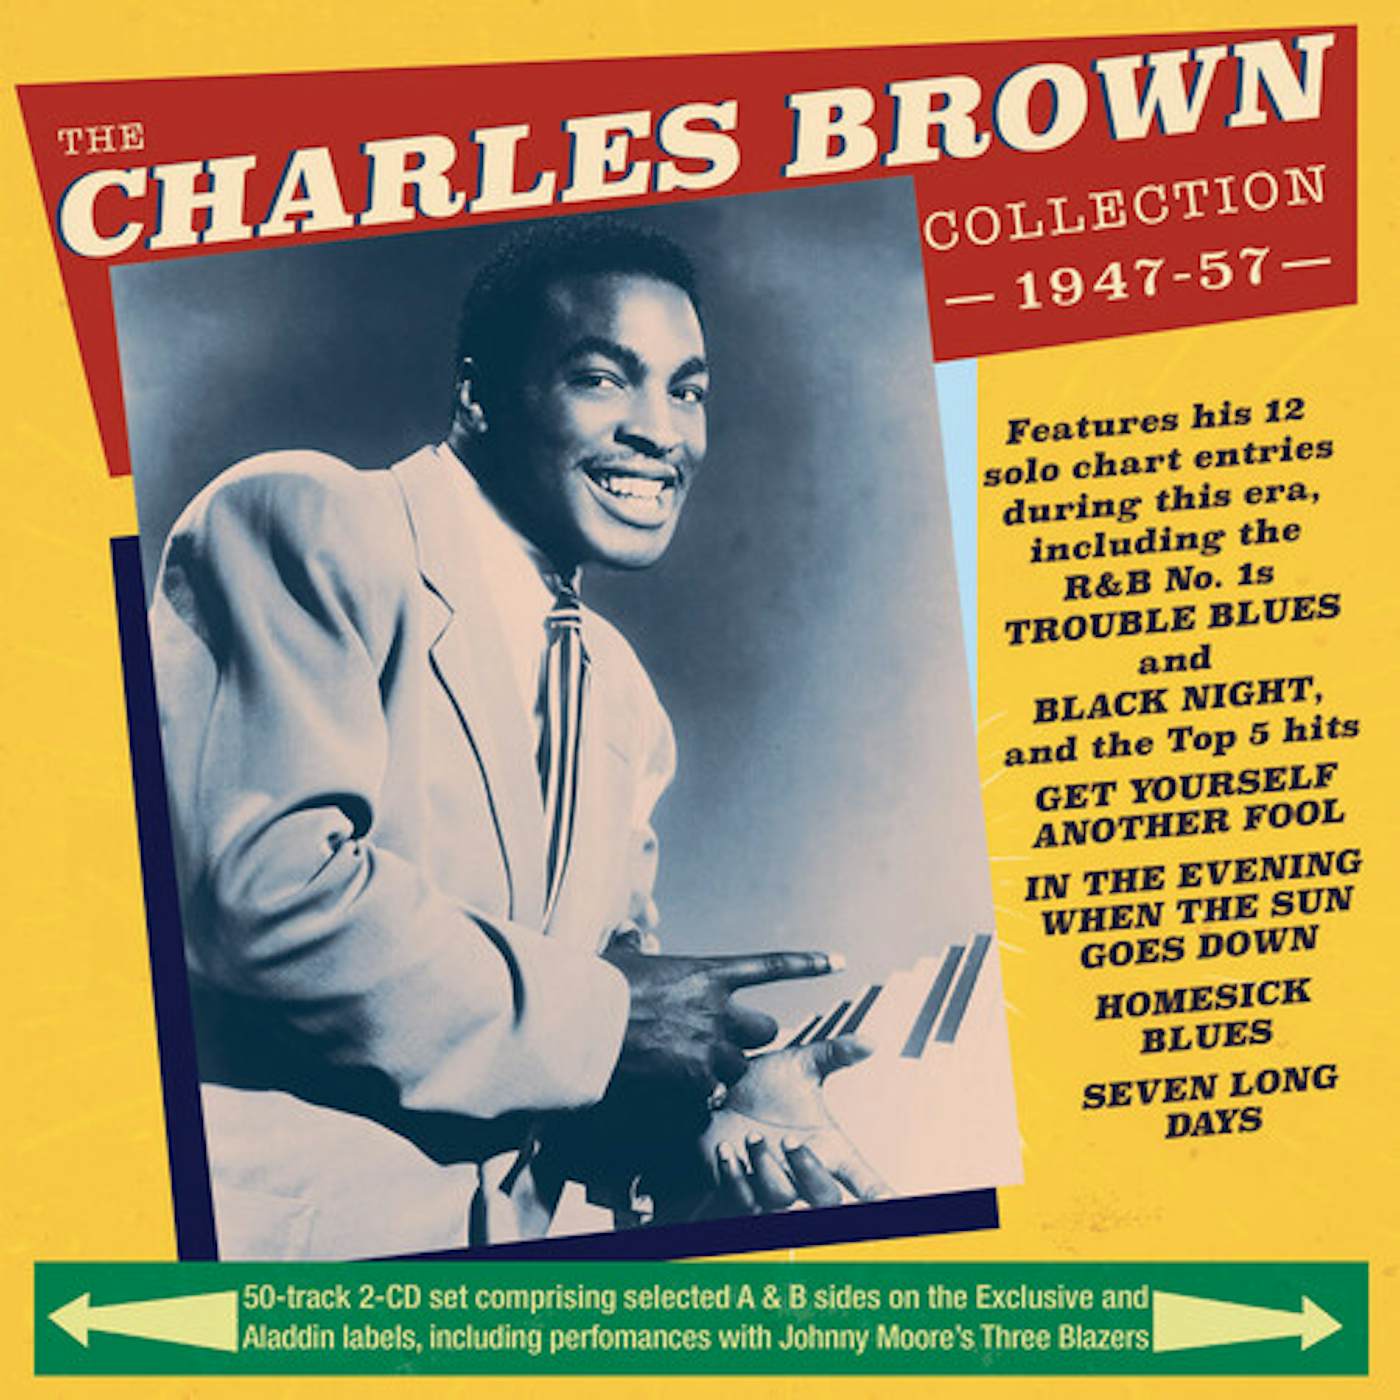 Charles Brown COLLECTION 1947-57 CD